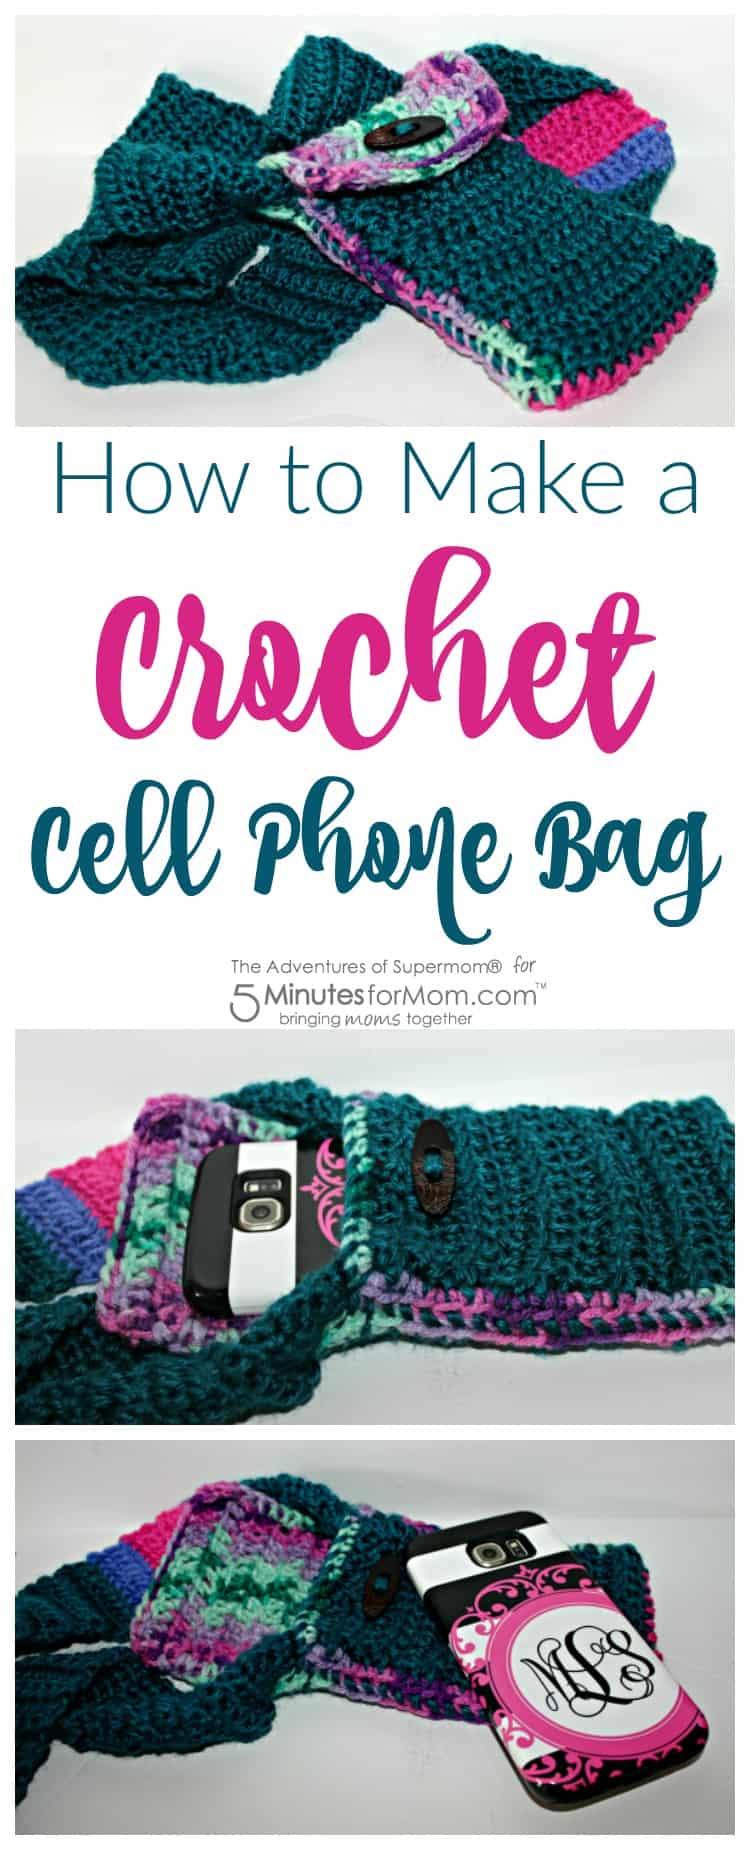 how to make a crochet cell phone bag